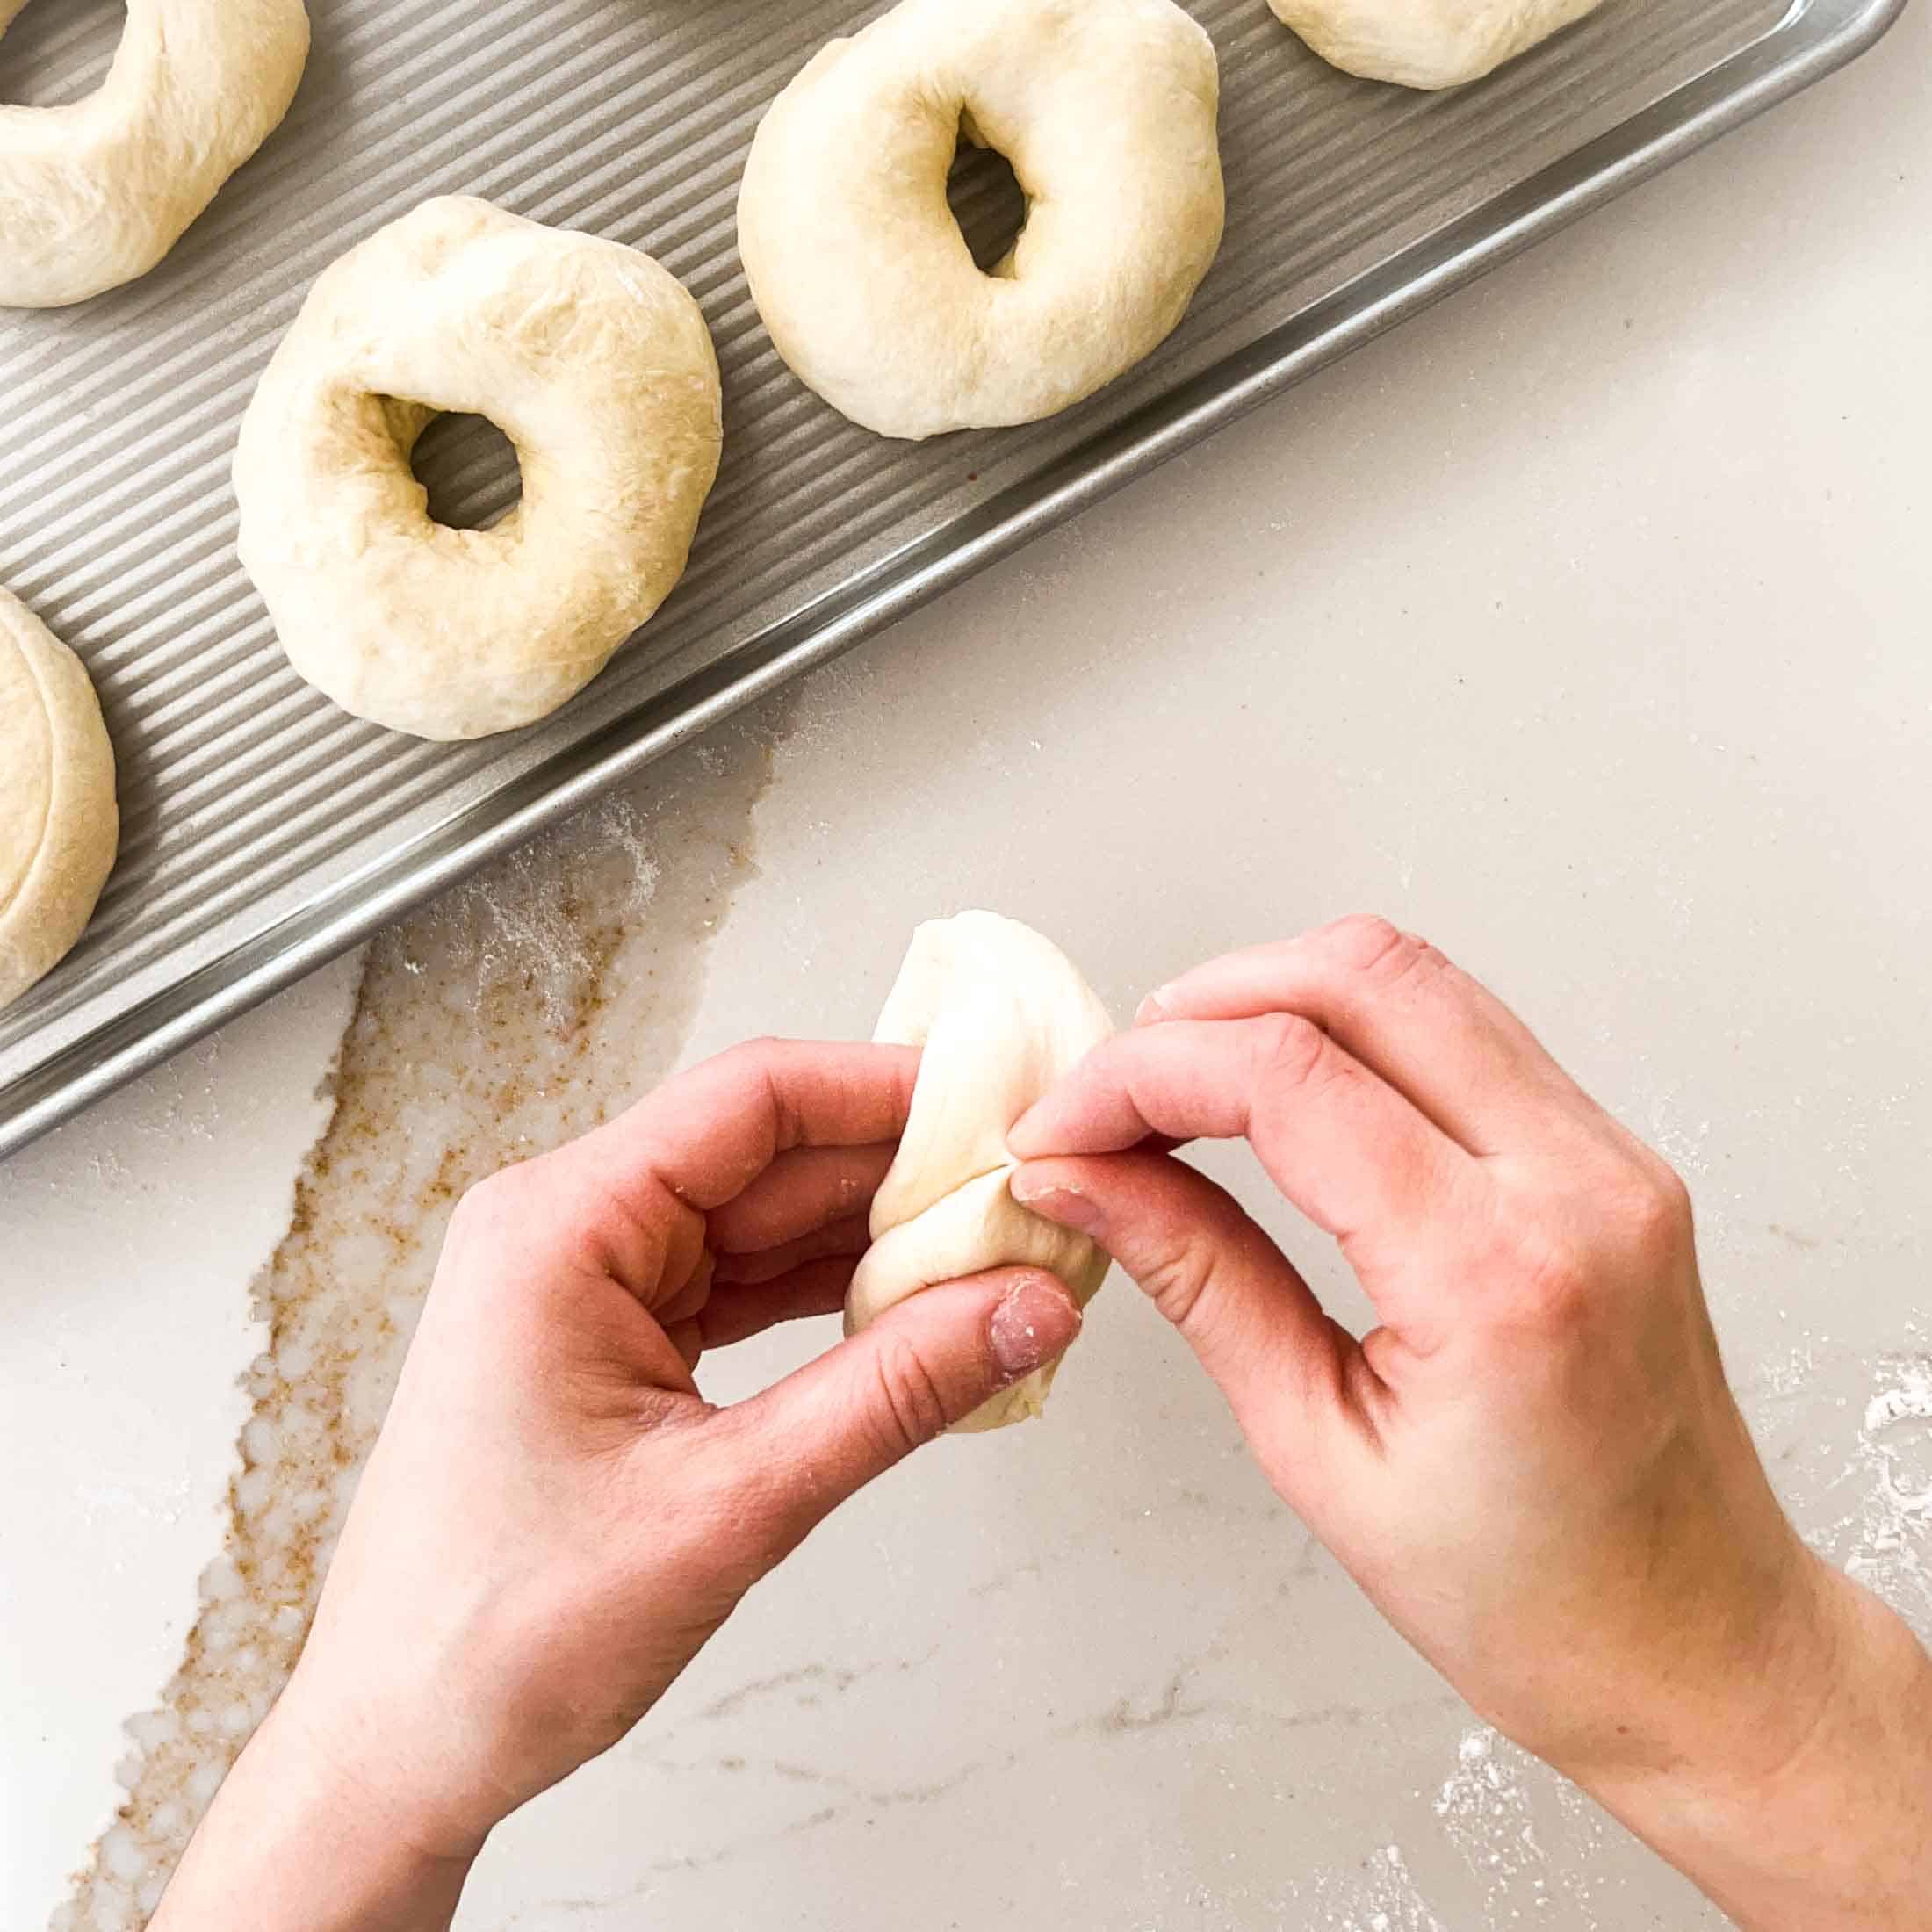 Joining dough at the ends and pinching to form a bagel.